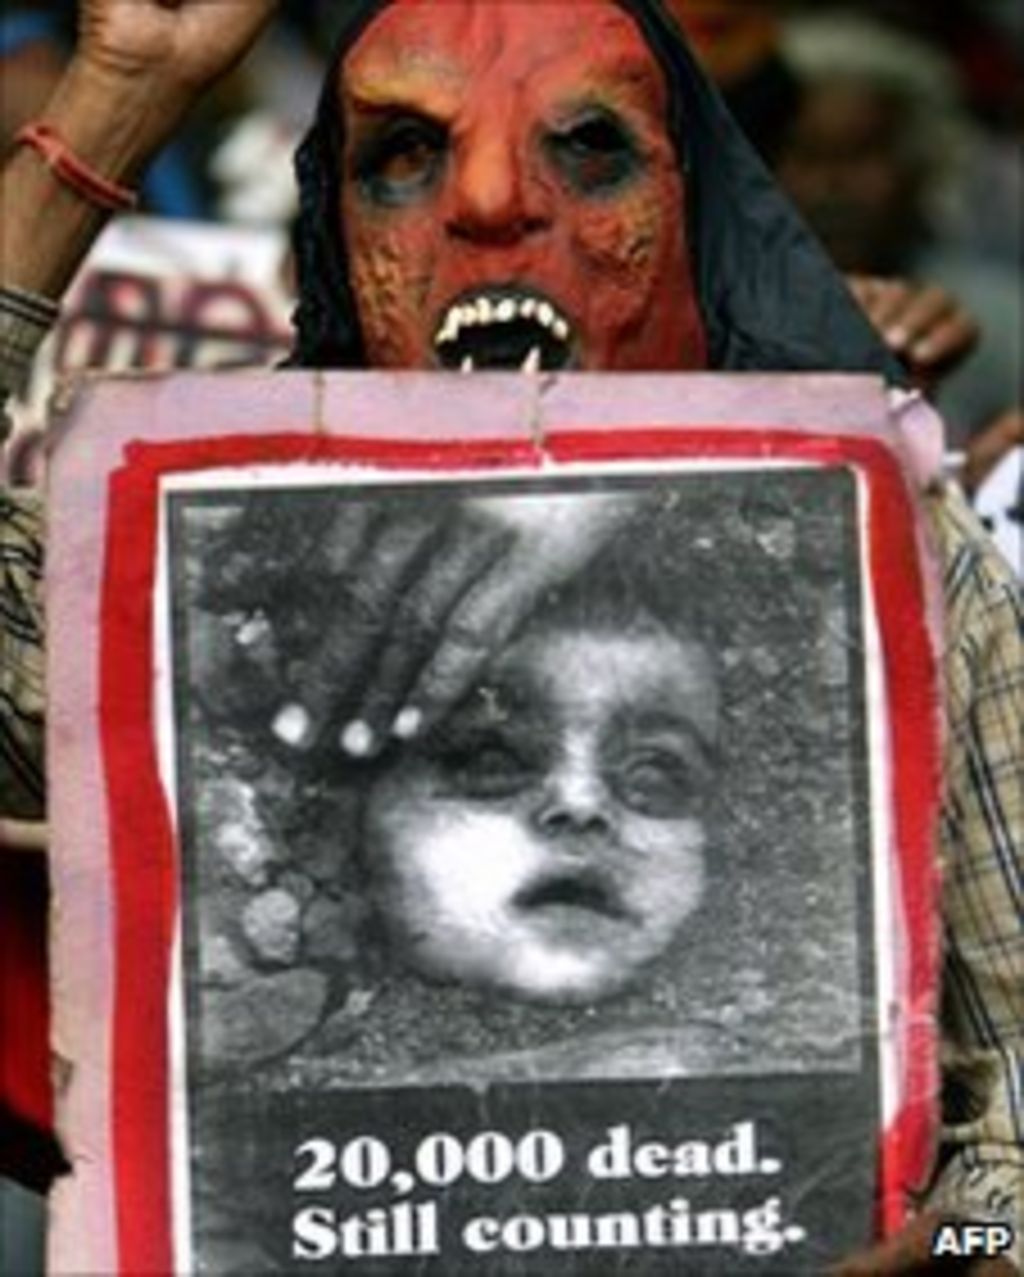 India seeks double Bhopal damages